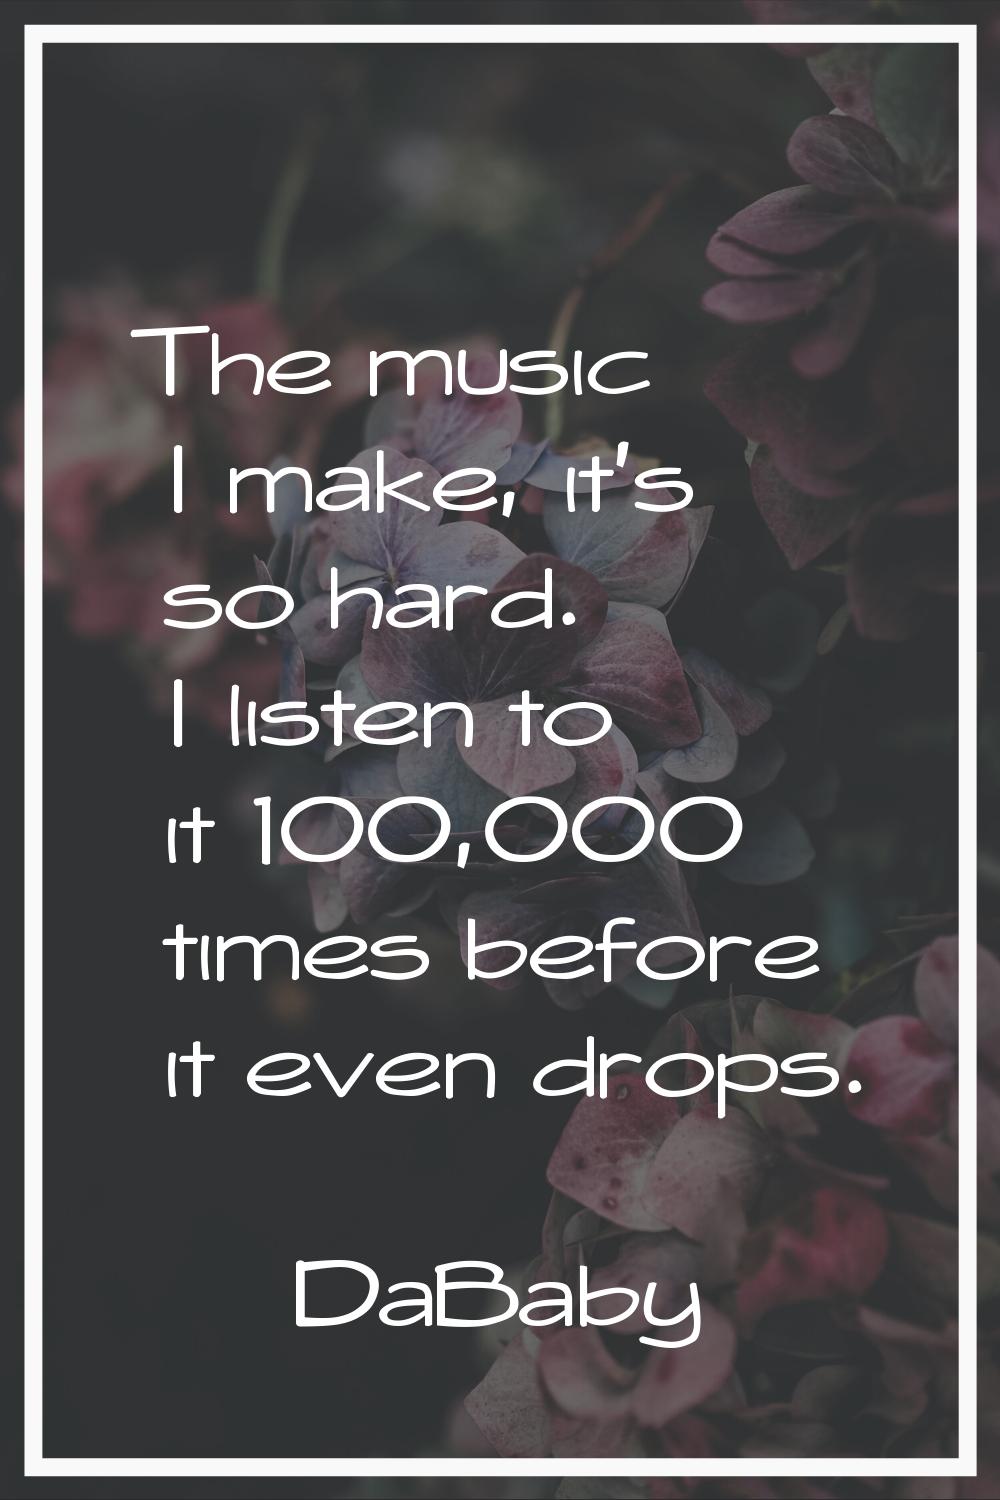 The music I make, it's so hard. I listen to it 100,000 times before it even drops.